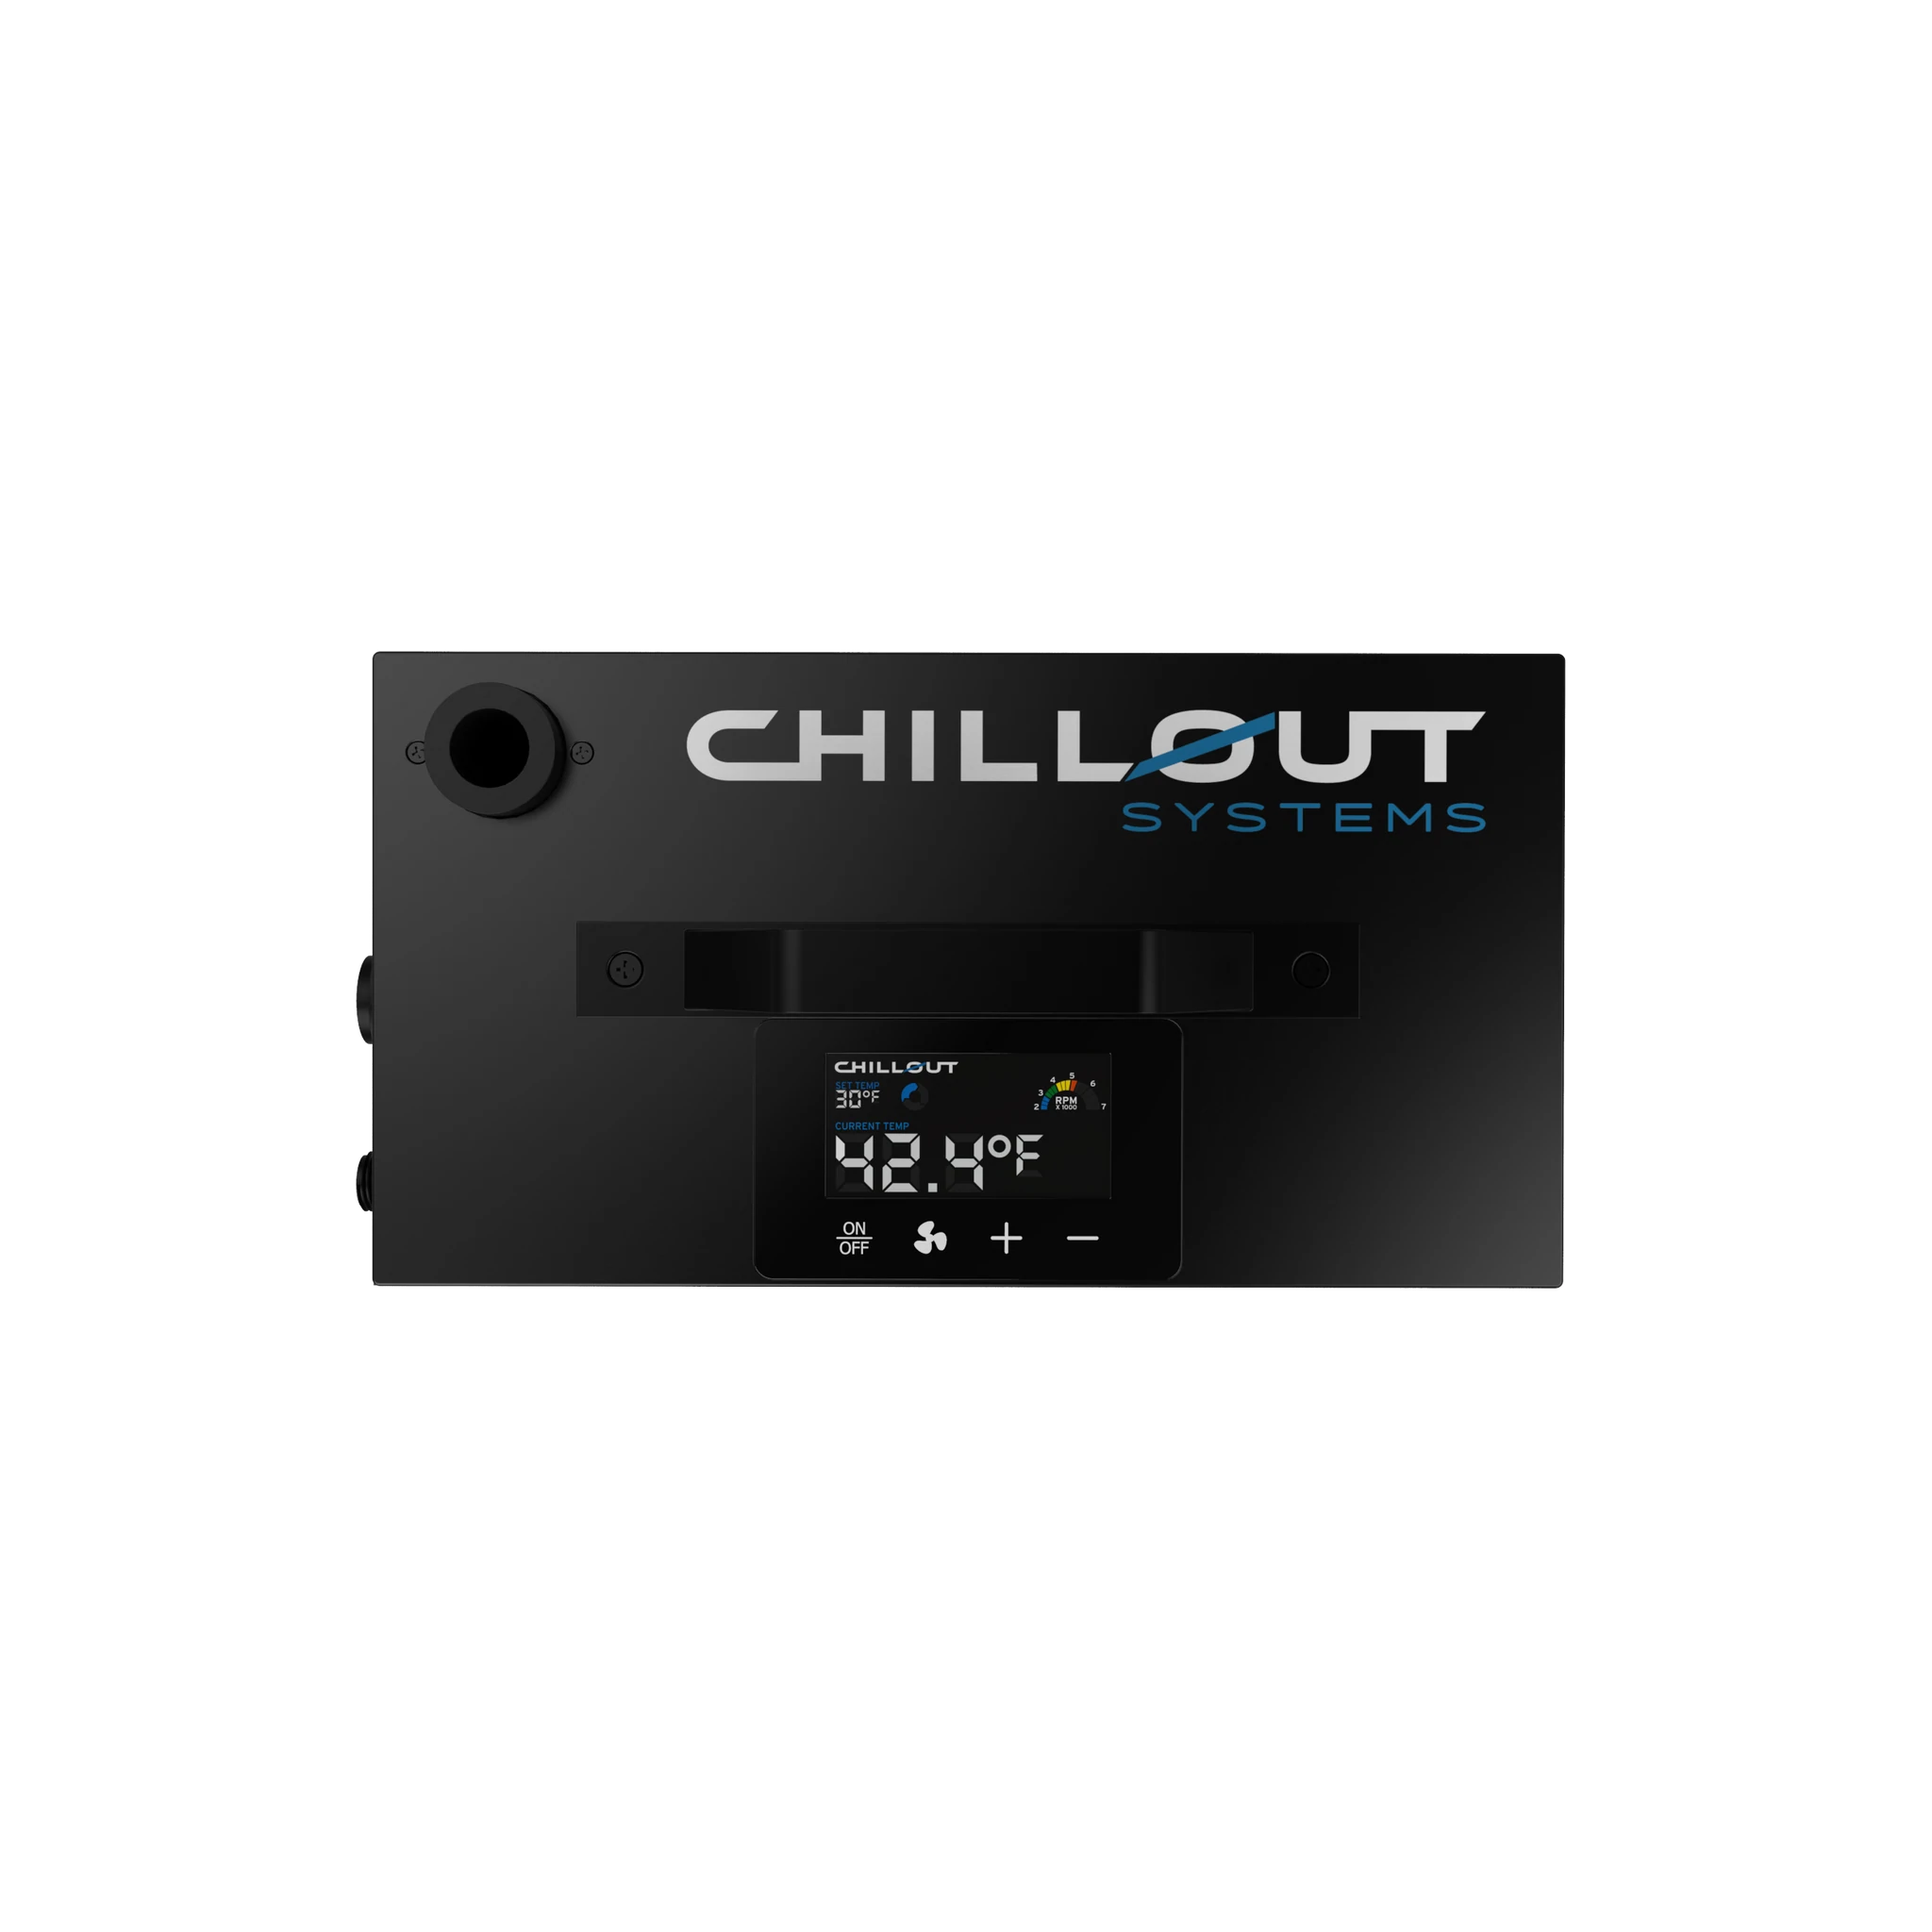 ChillOut AirCon Helmet Cooler